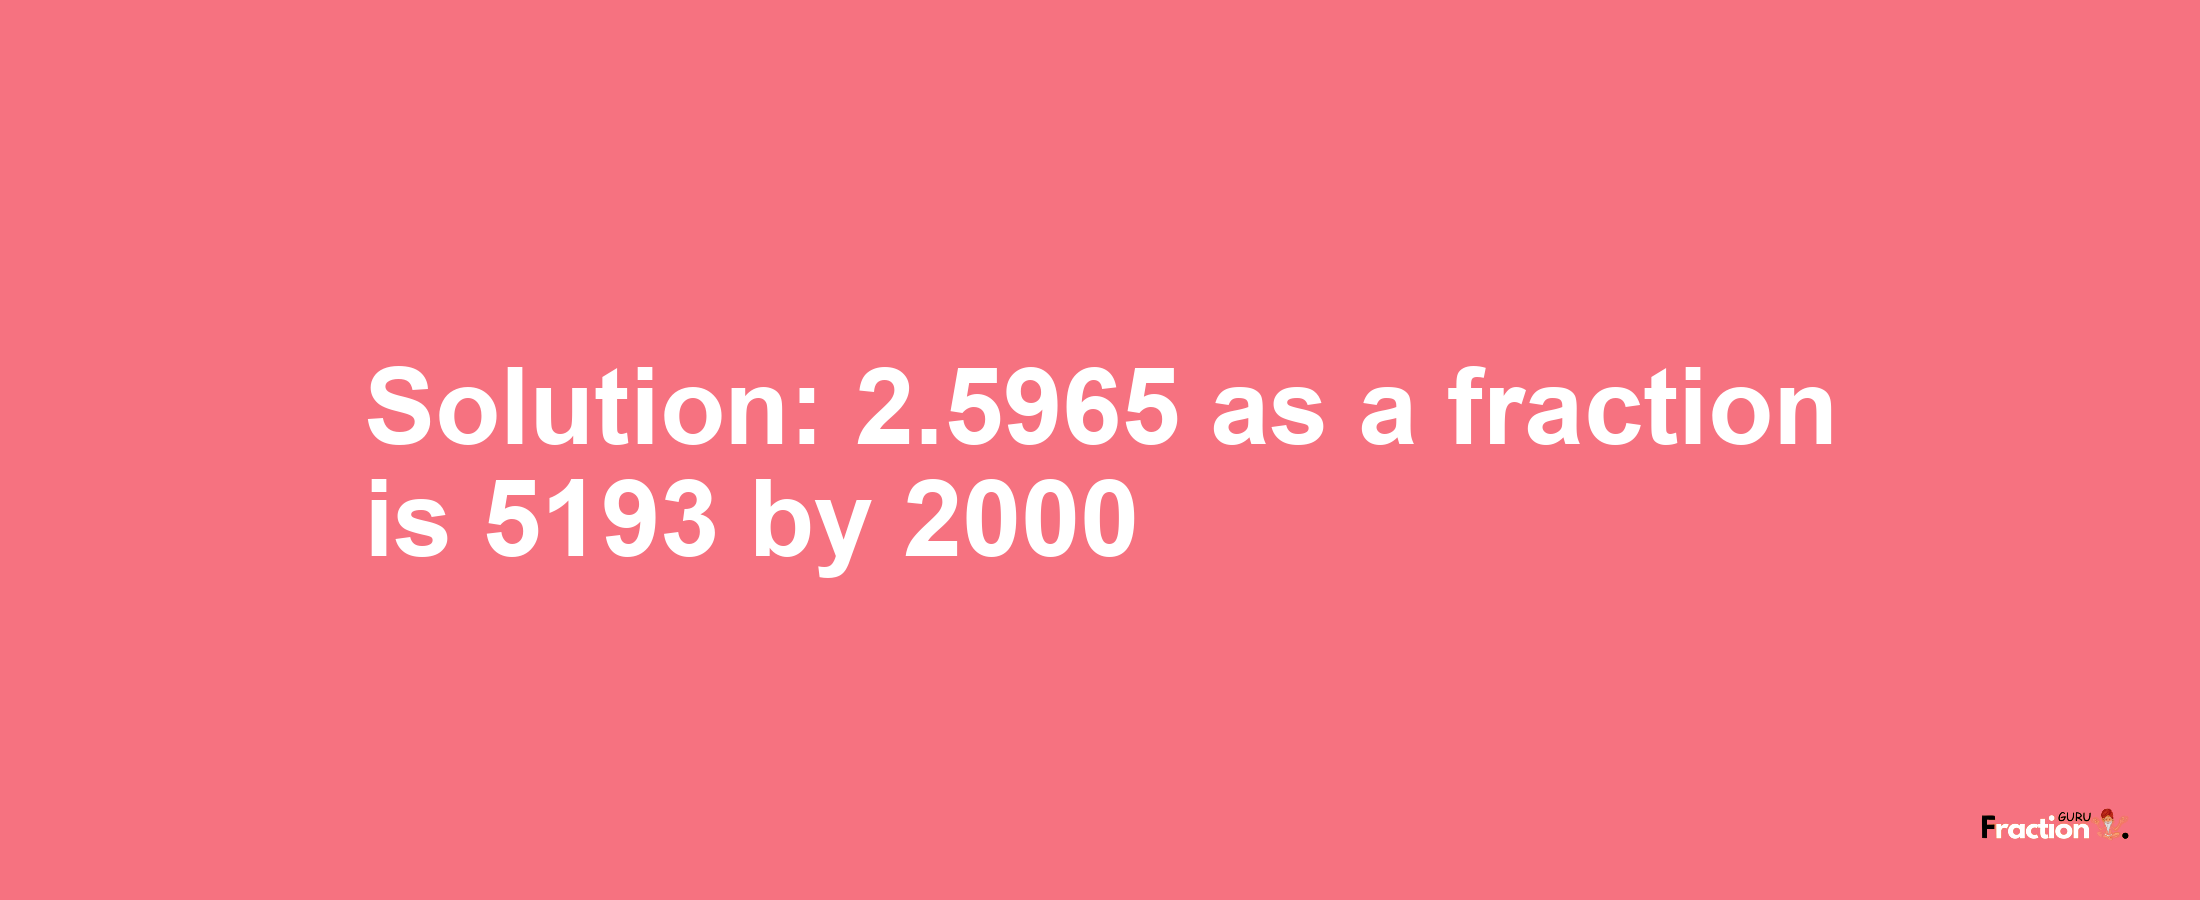 Solution:2.5965 as a fraction is 5193/2000